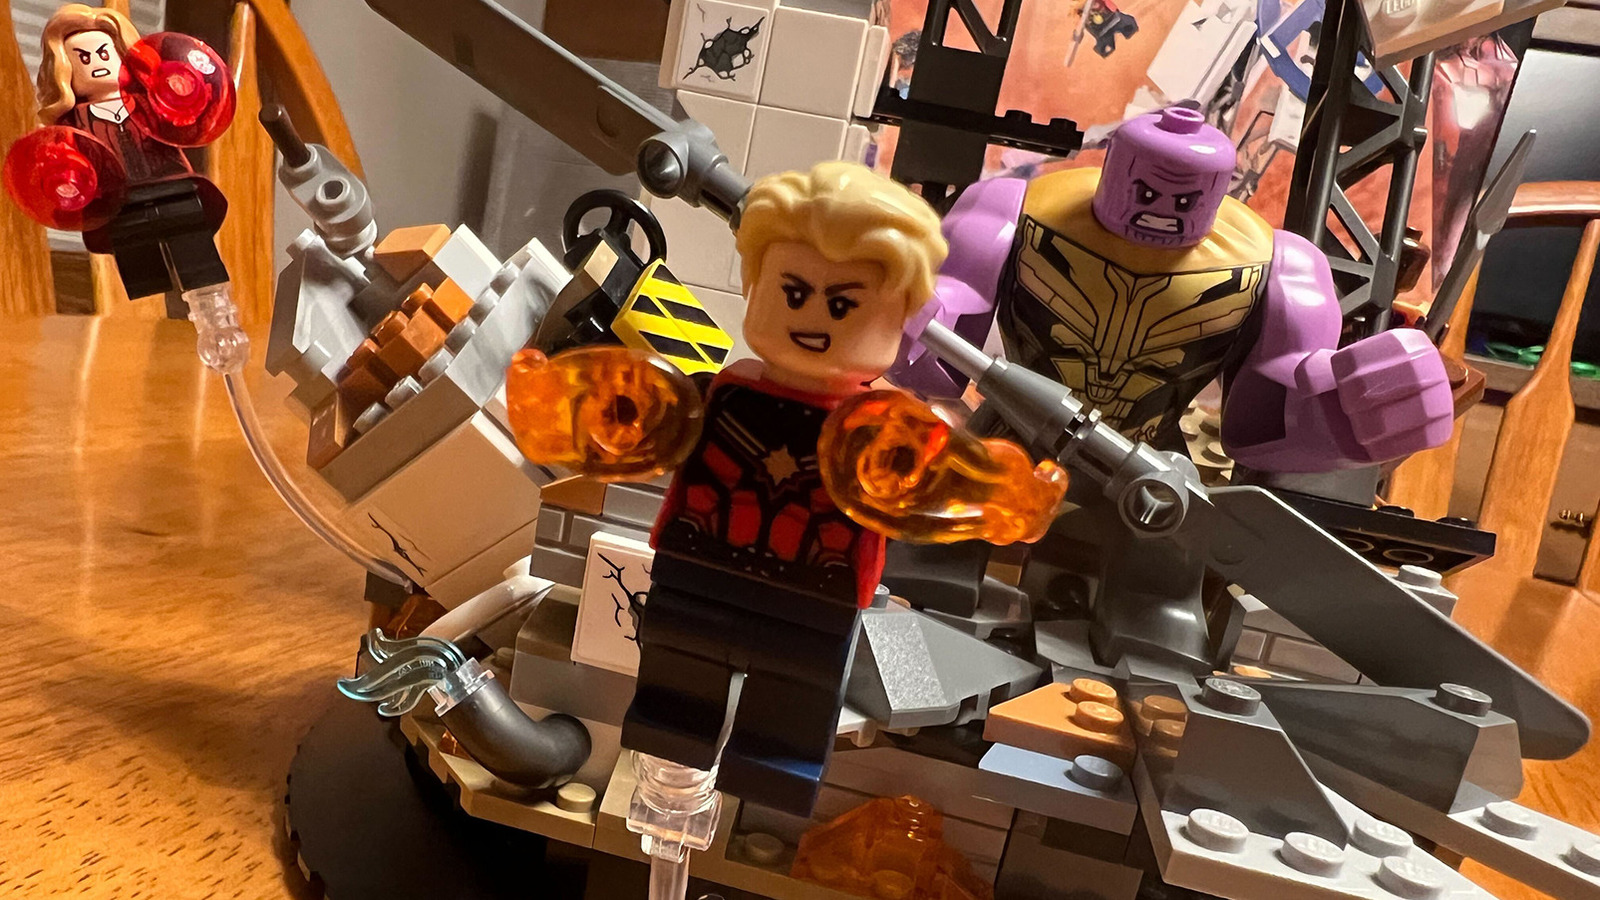 LEGO's Avengers: Endgame Final Battle Is A Clever But Incomplete